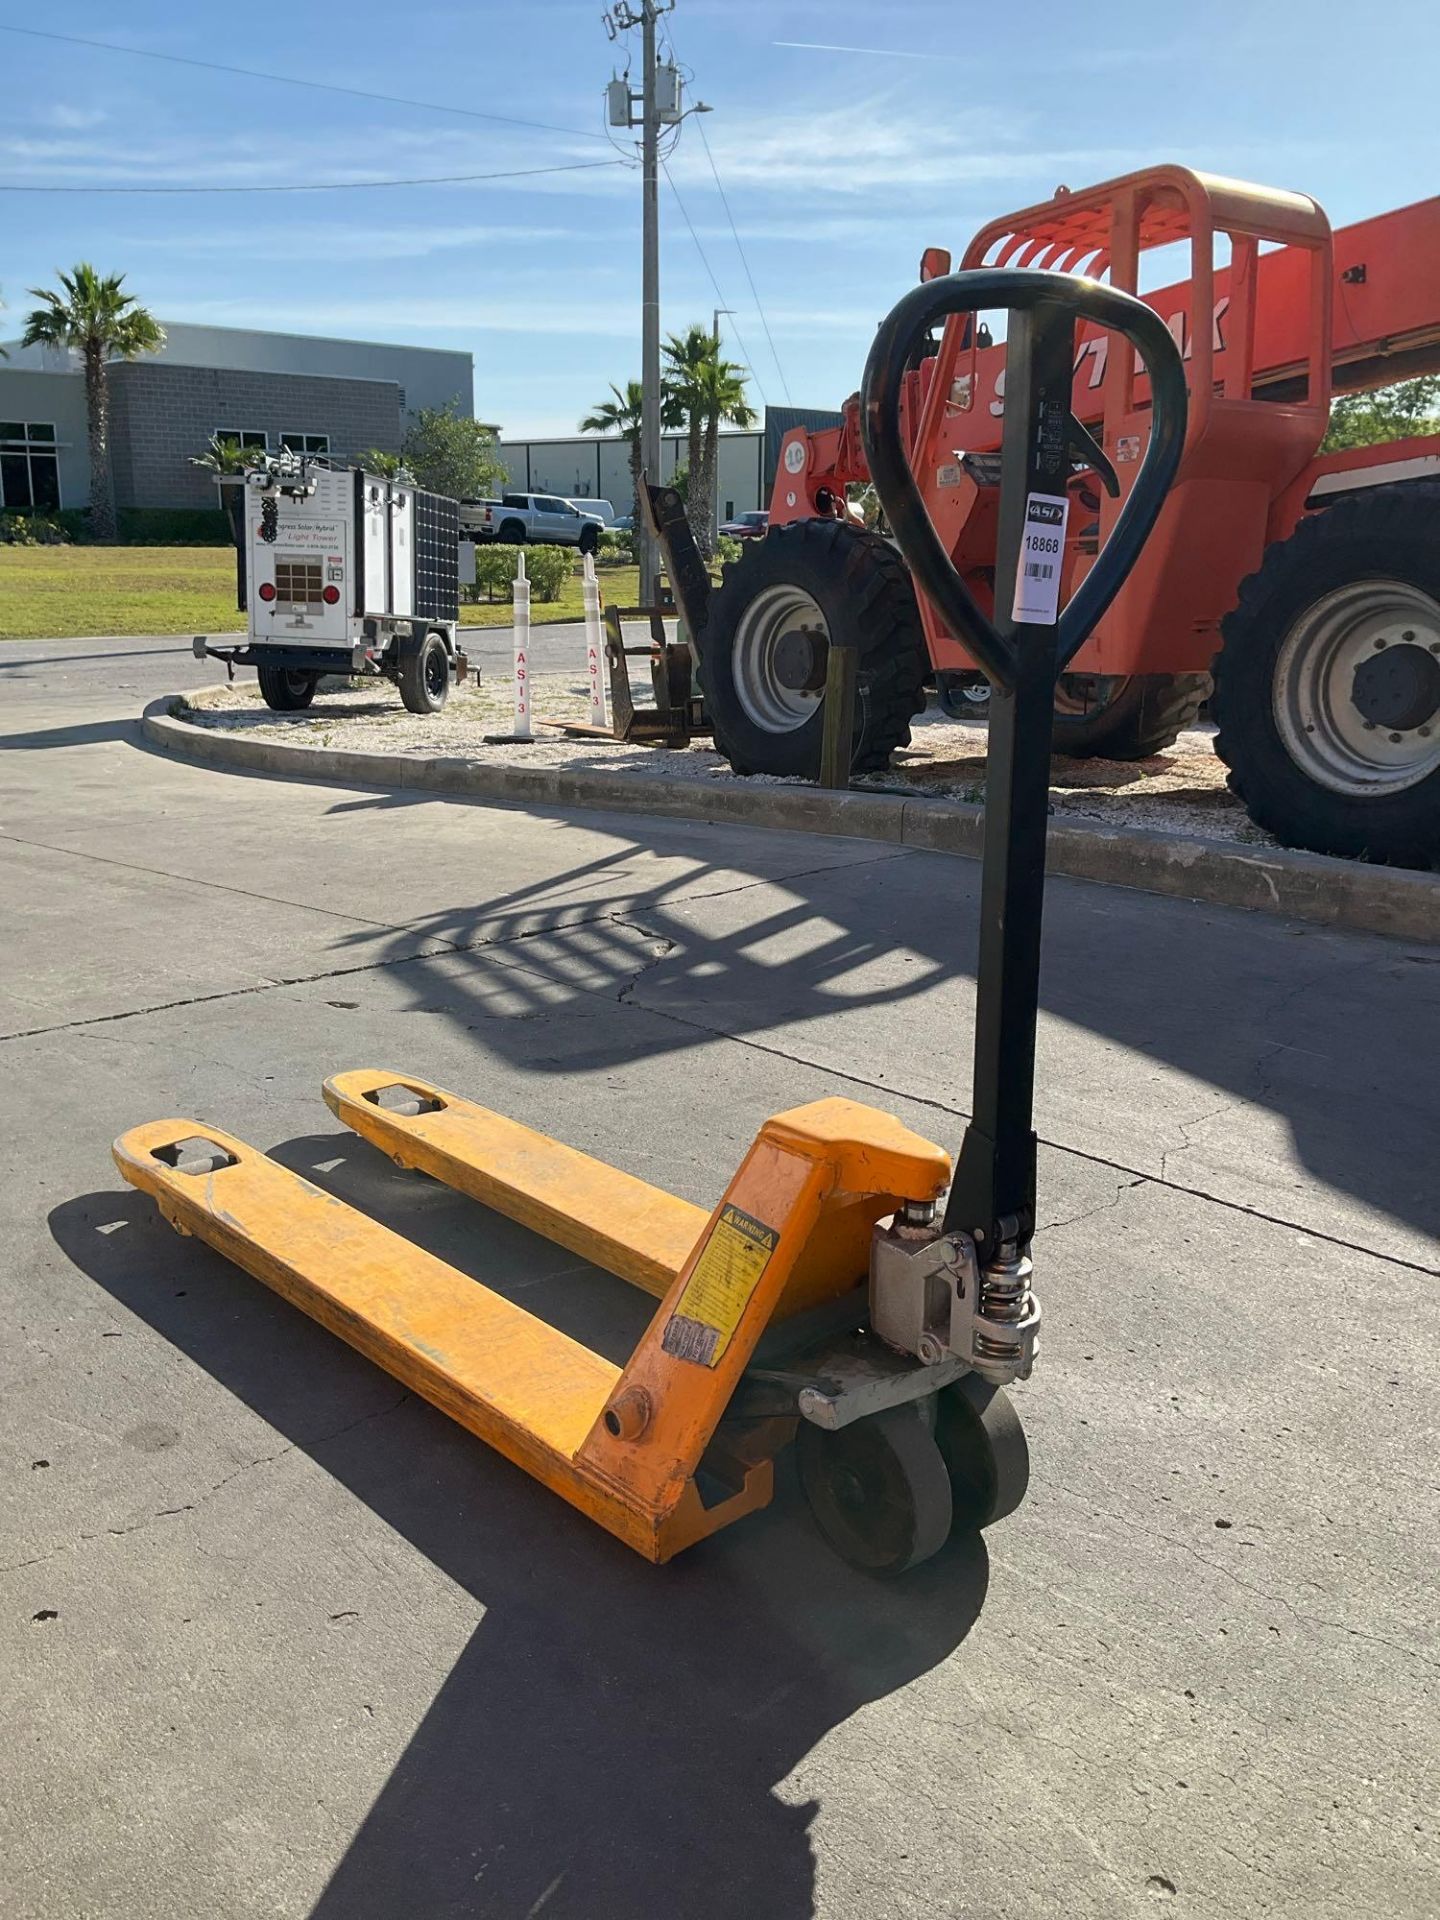 XILIN HYDRAULIC PALLET JACK MODEL XET55, APPROX MAX CAPACITY 5500LBS - Image 5 of 10